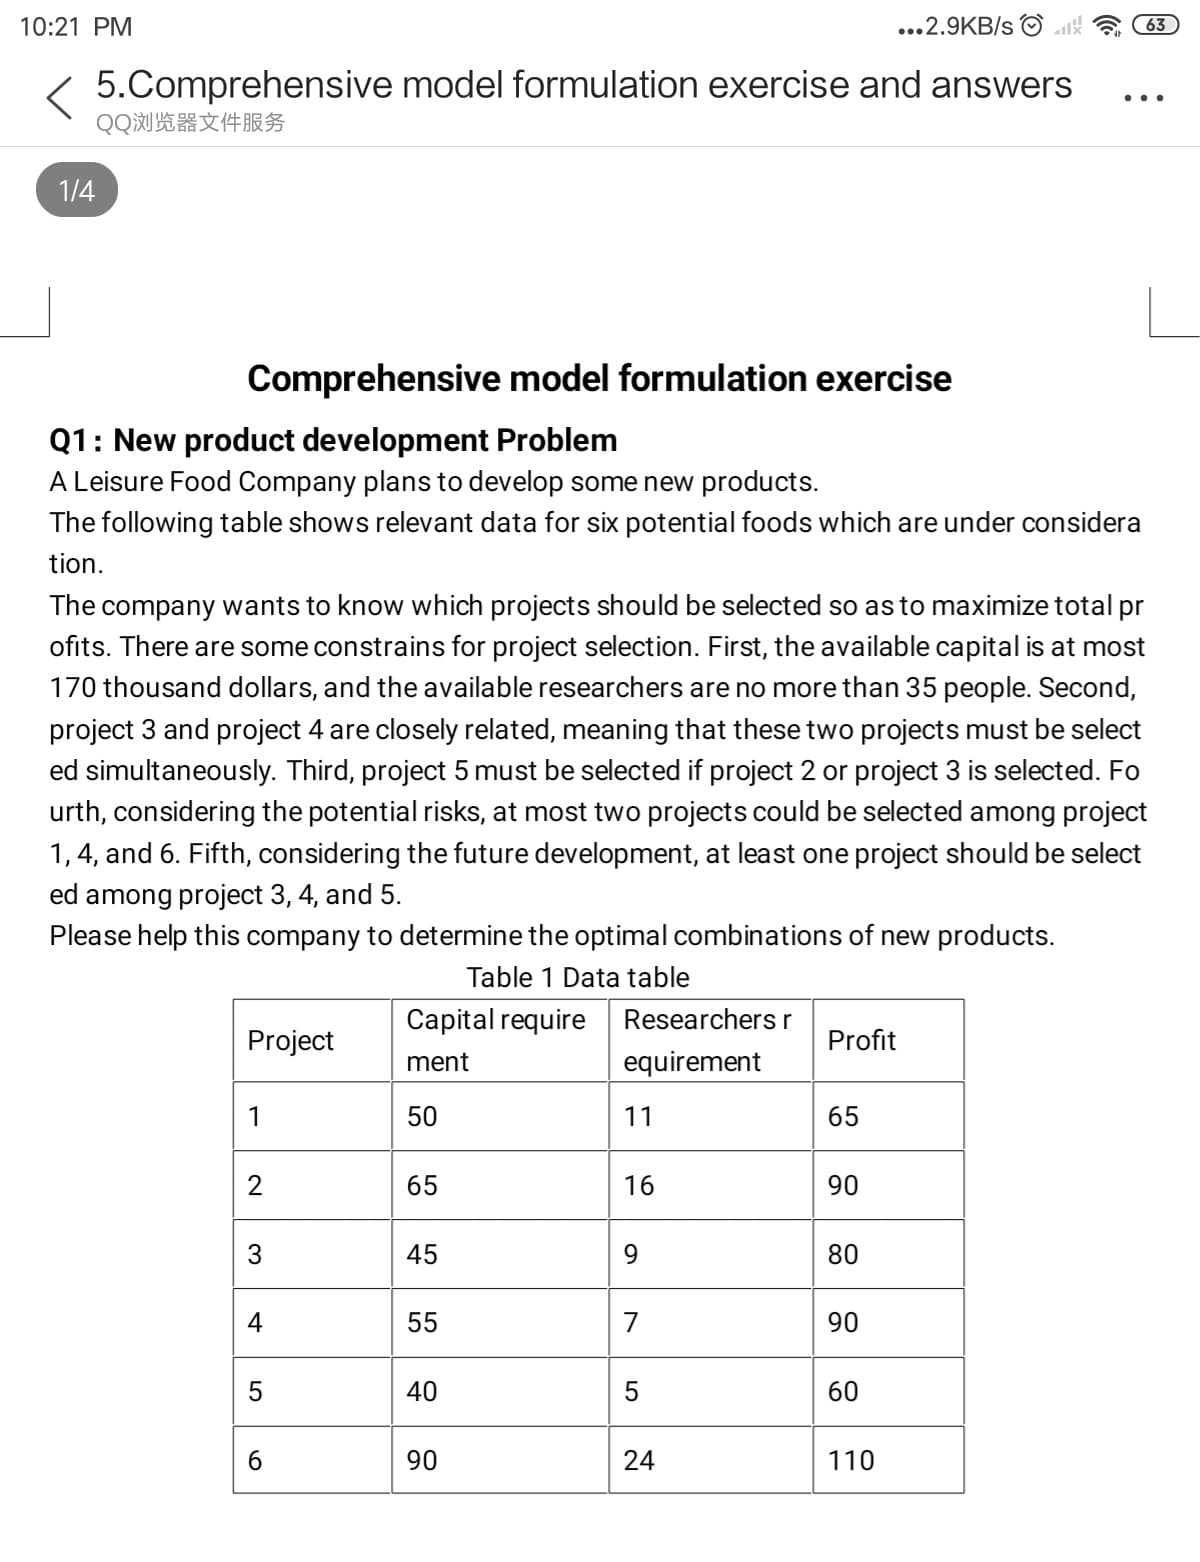 Comprehensive model formulation exercise
Q1: New product development Problem
A Leisure Food Company plans to develop some new products.
The following table shows relevant data for six potential foods which are under considera
tion.
The company wants to know which projects should be selected so asto maximize total pr
ofits. There are some constrains for project selection. First, the available capital is at most
170 thousand dollars, and the available researchers are no more than 35 people. Second,
project 3 and project 4 are closely related, meaning that these two projects must be select
ed simultaneously. Third, project 5 must be selected if project 2 or project 3 is selected. Fo
urth, considering the potential risks, at most two projects could be selected among project
1, 4, and 6. Fifth, considering the future development, at least one project should be select
ed among project 3, 4, and 5.
Please help this company to determine the optimal combinations of new products.
Table 1 Data table
Capital require Researchers r
Project
Profit
ment
equirement
1
50
11
65
2
65
16
90
3
45
9.
80
4
55
7
90
40
60
90
110
24
5
